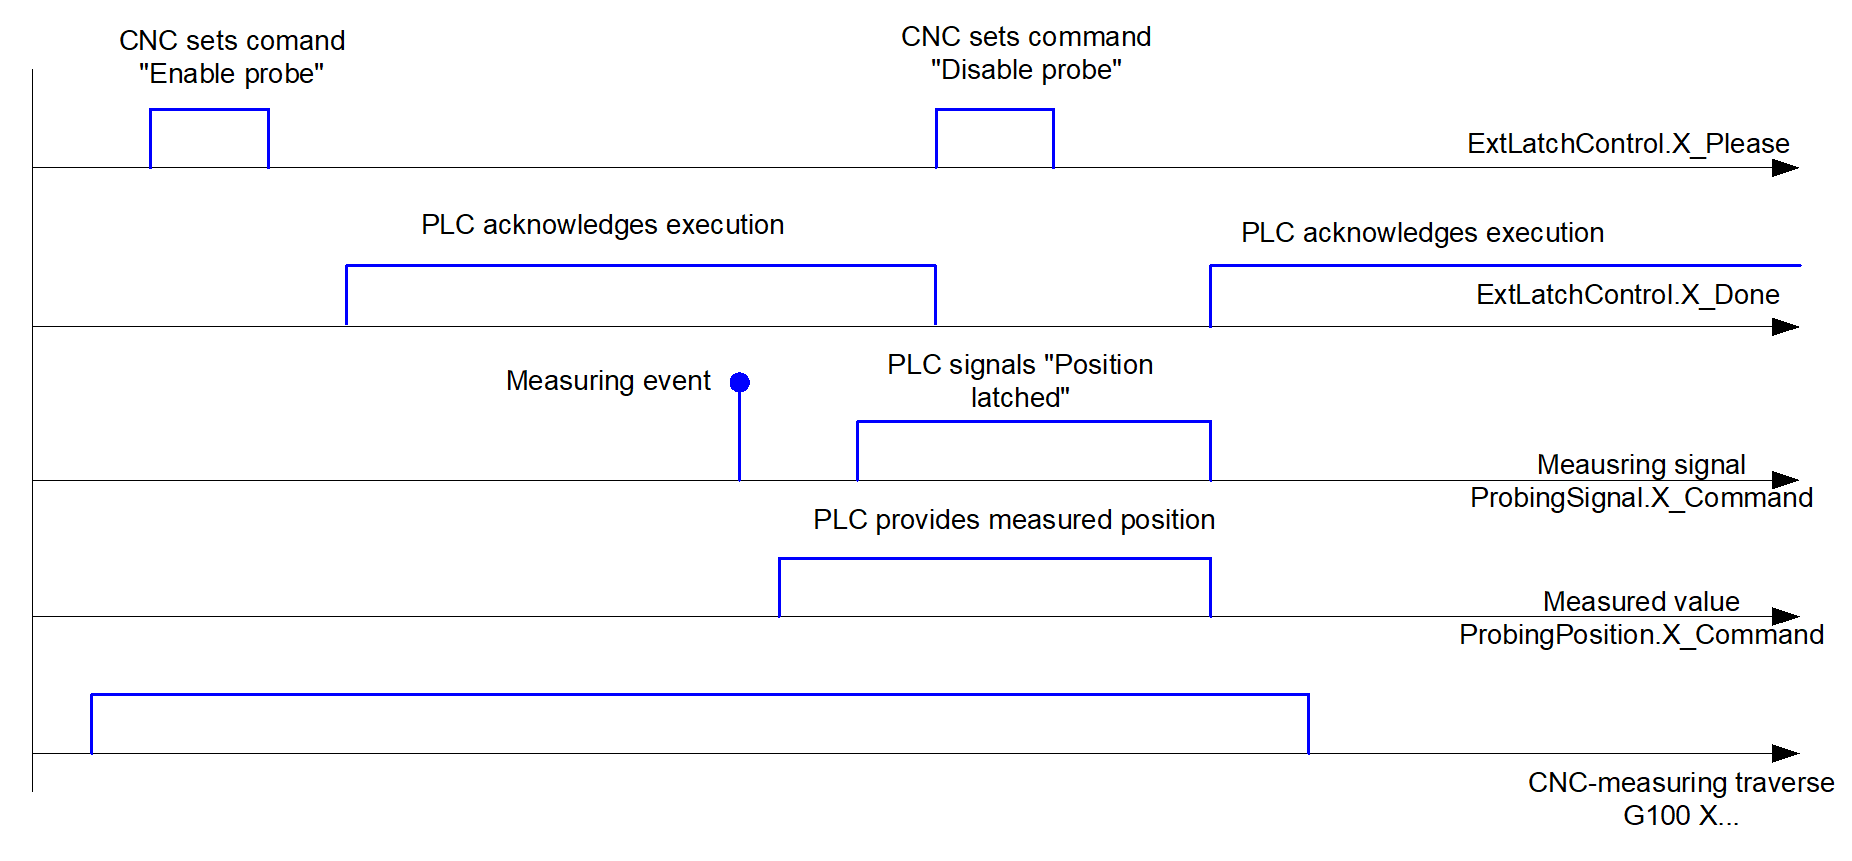 Time sequence of a measurement run with the external measuring interface